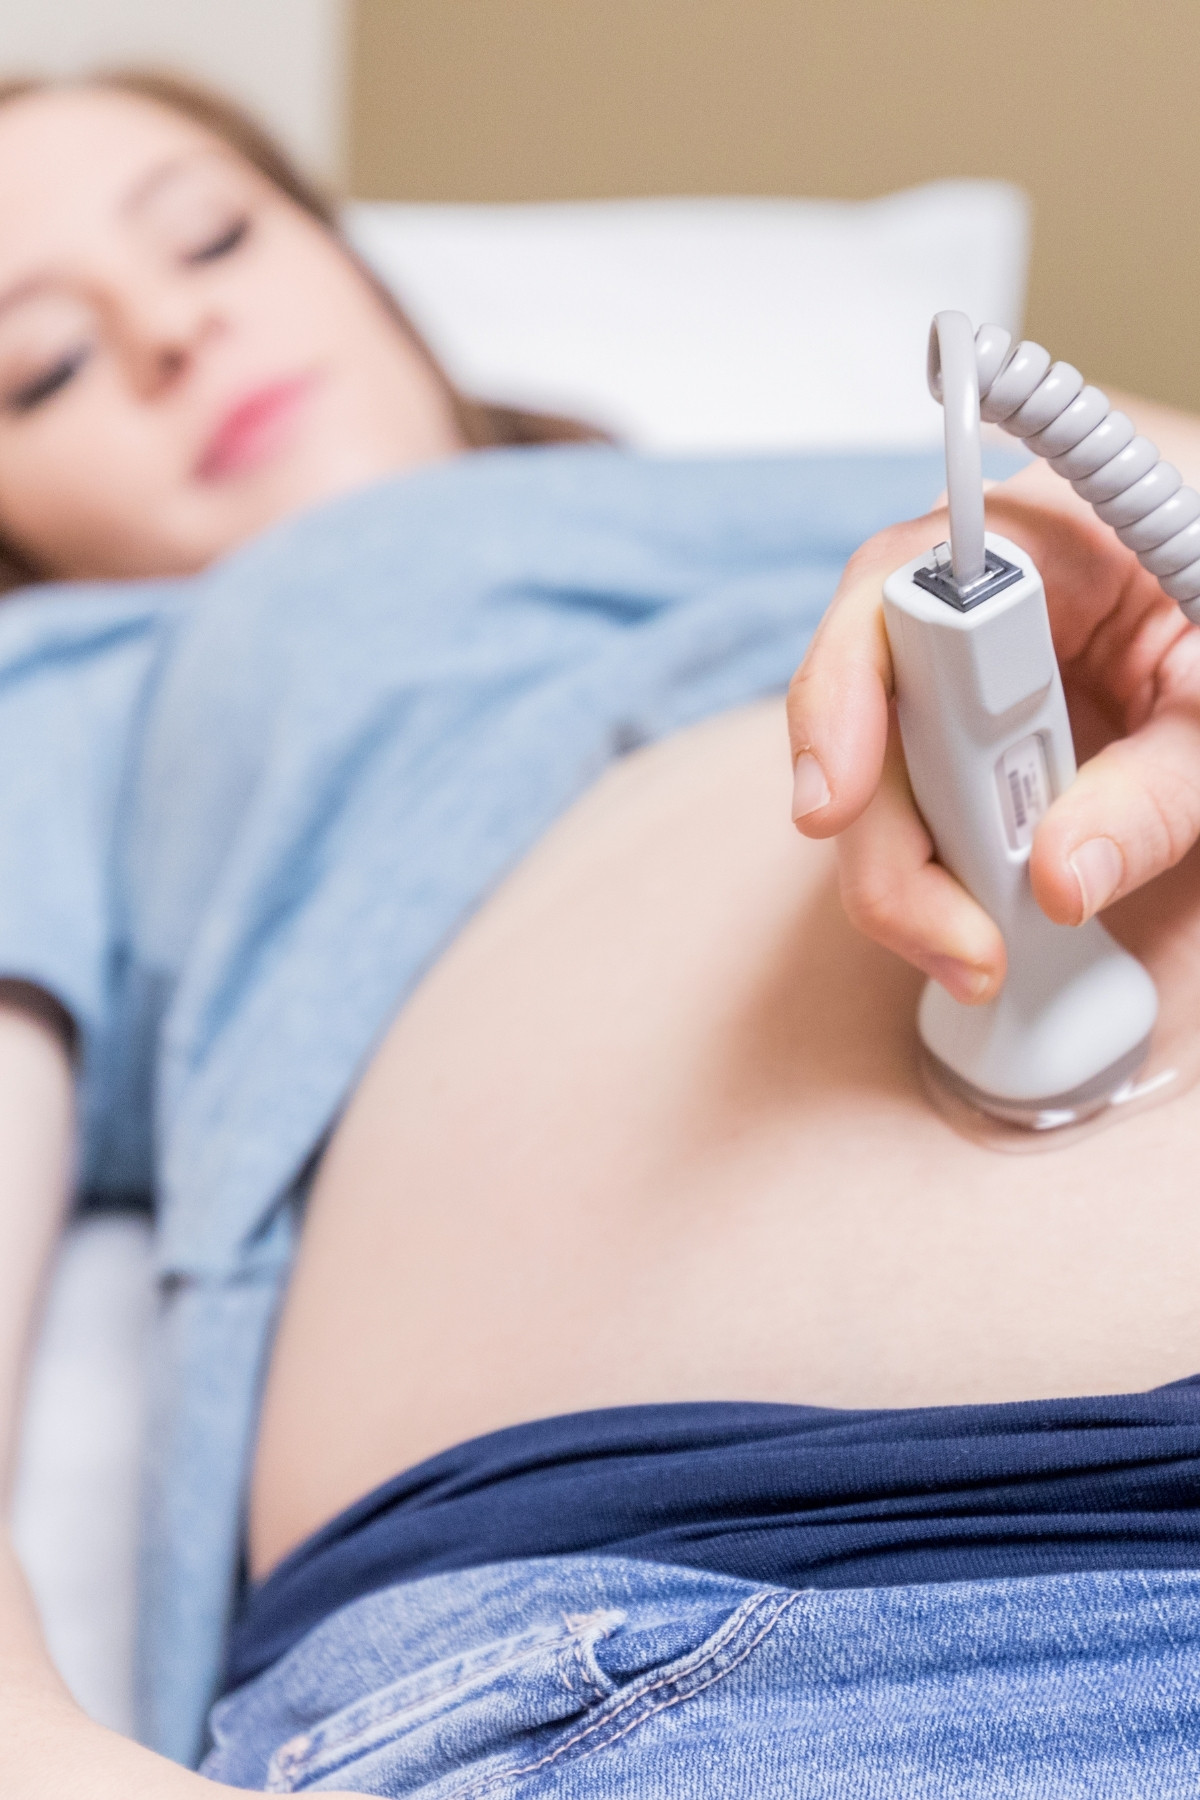 Pregnant woman lies on the bed in a doctor’s office while receiving a pregnancy ultrasound.